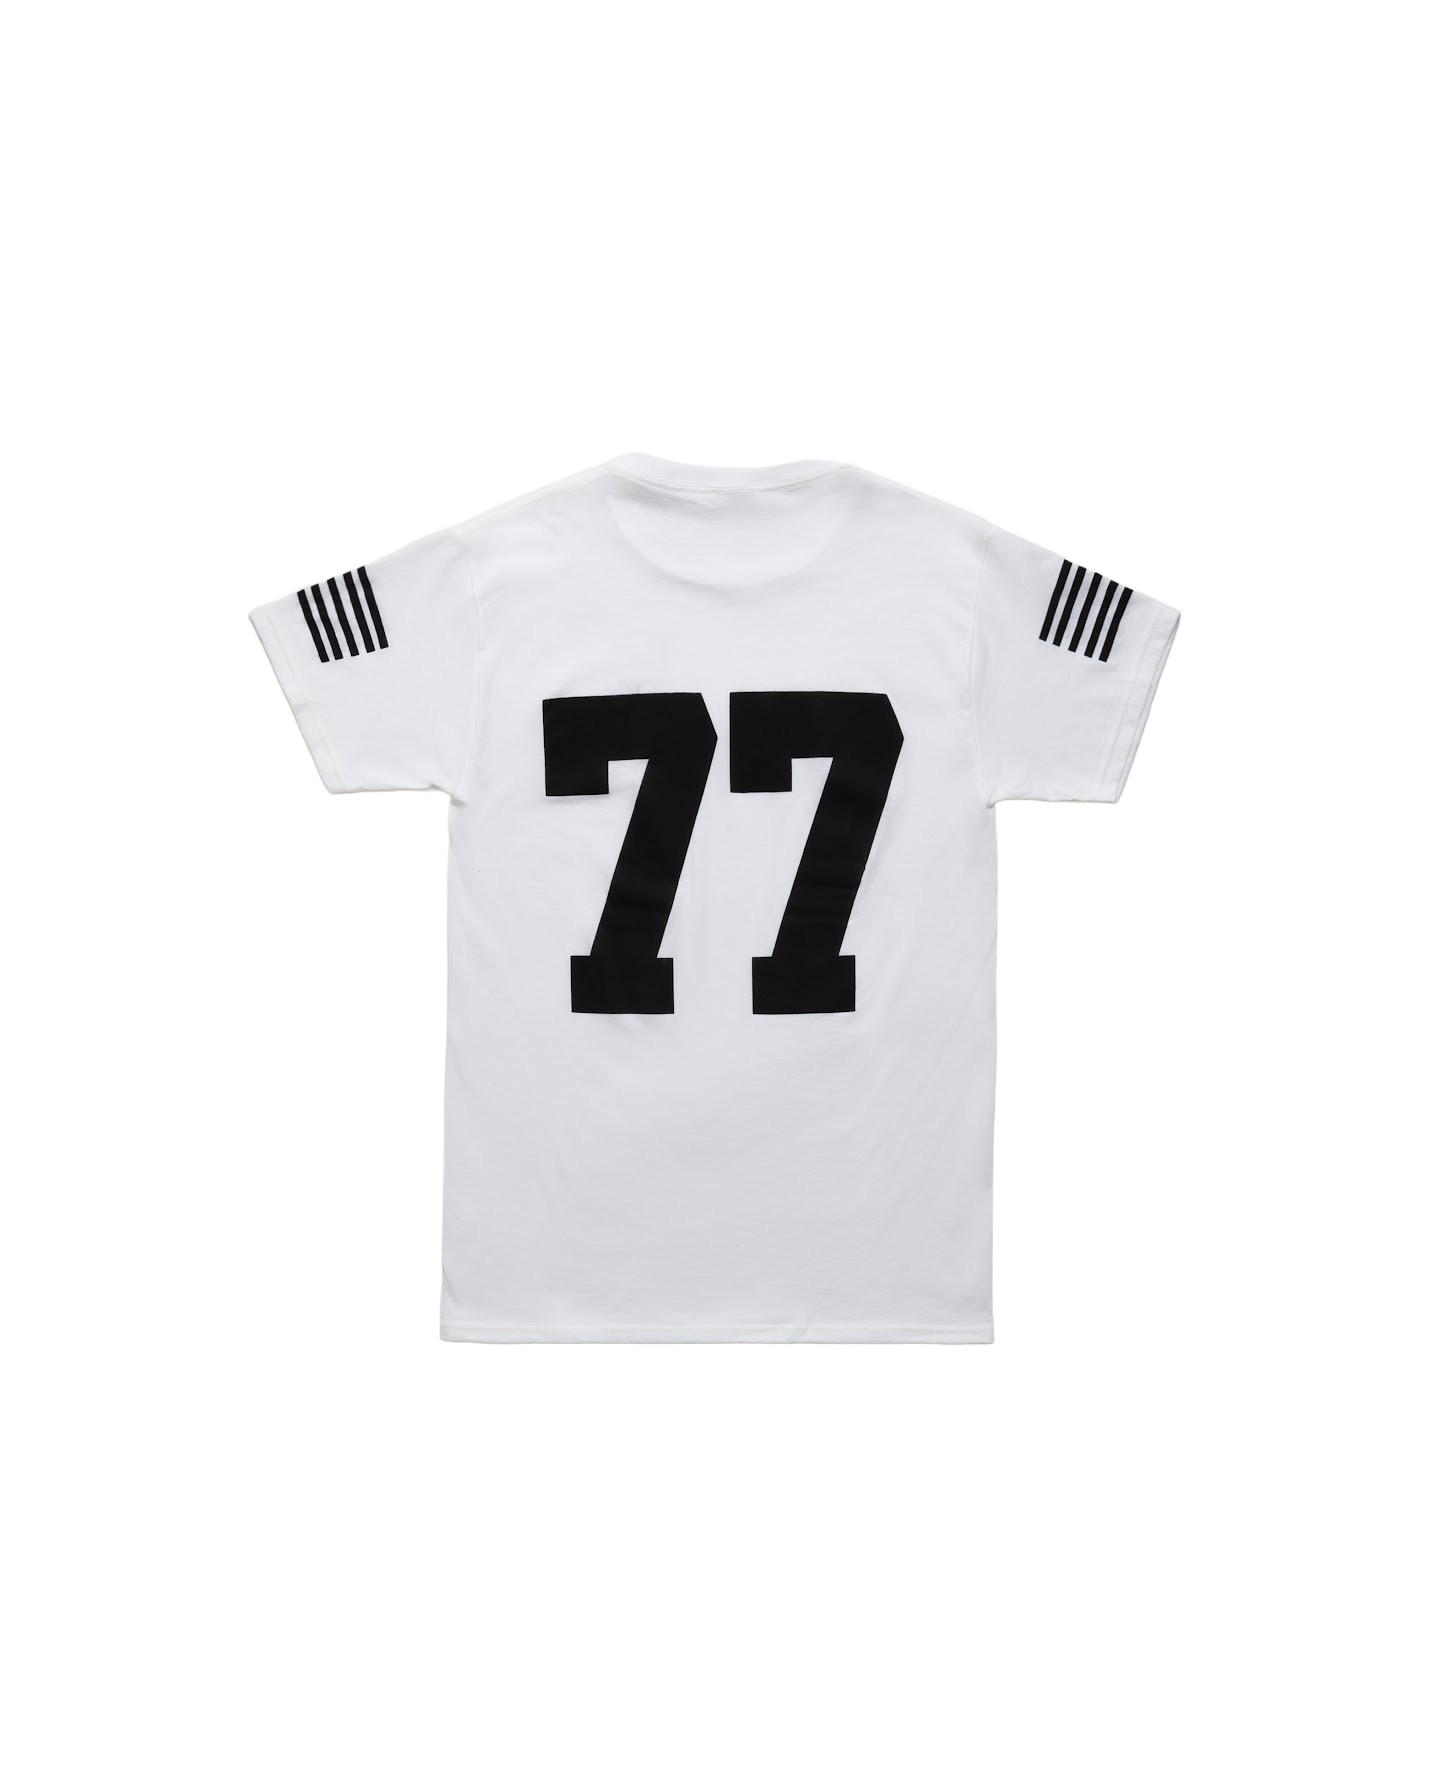 Product Image of 77 T-shirt #2